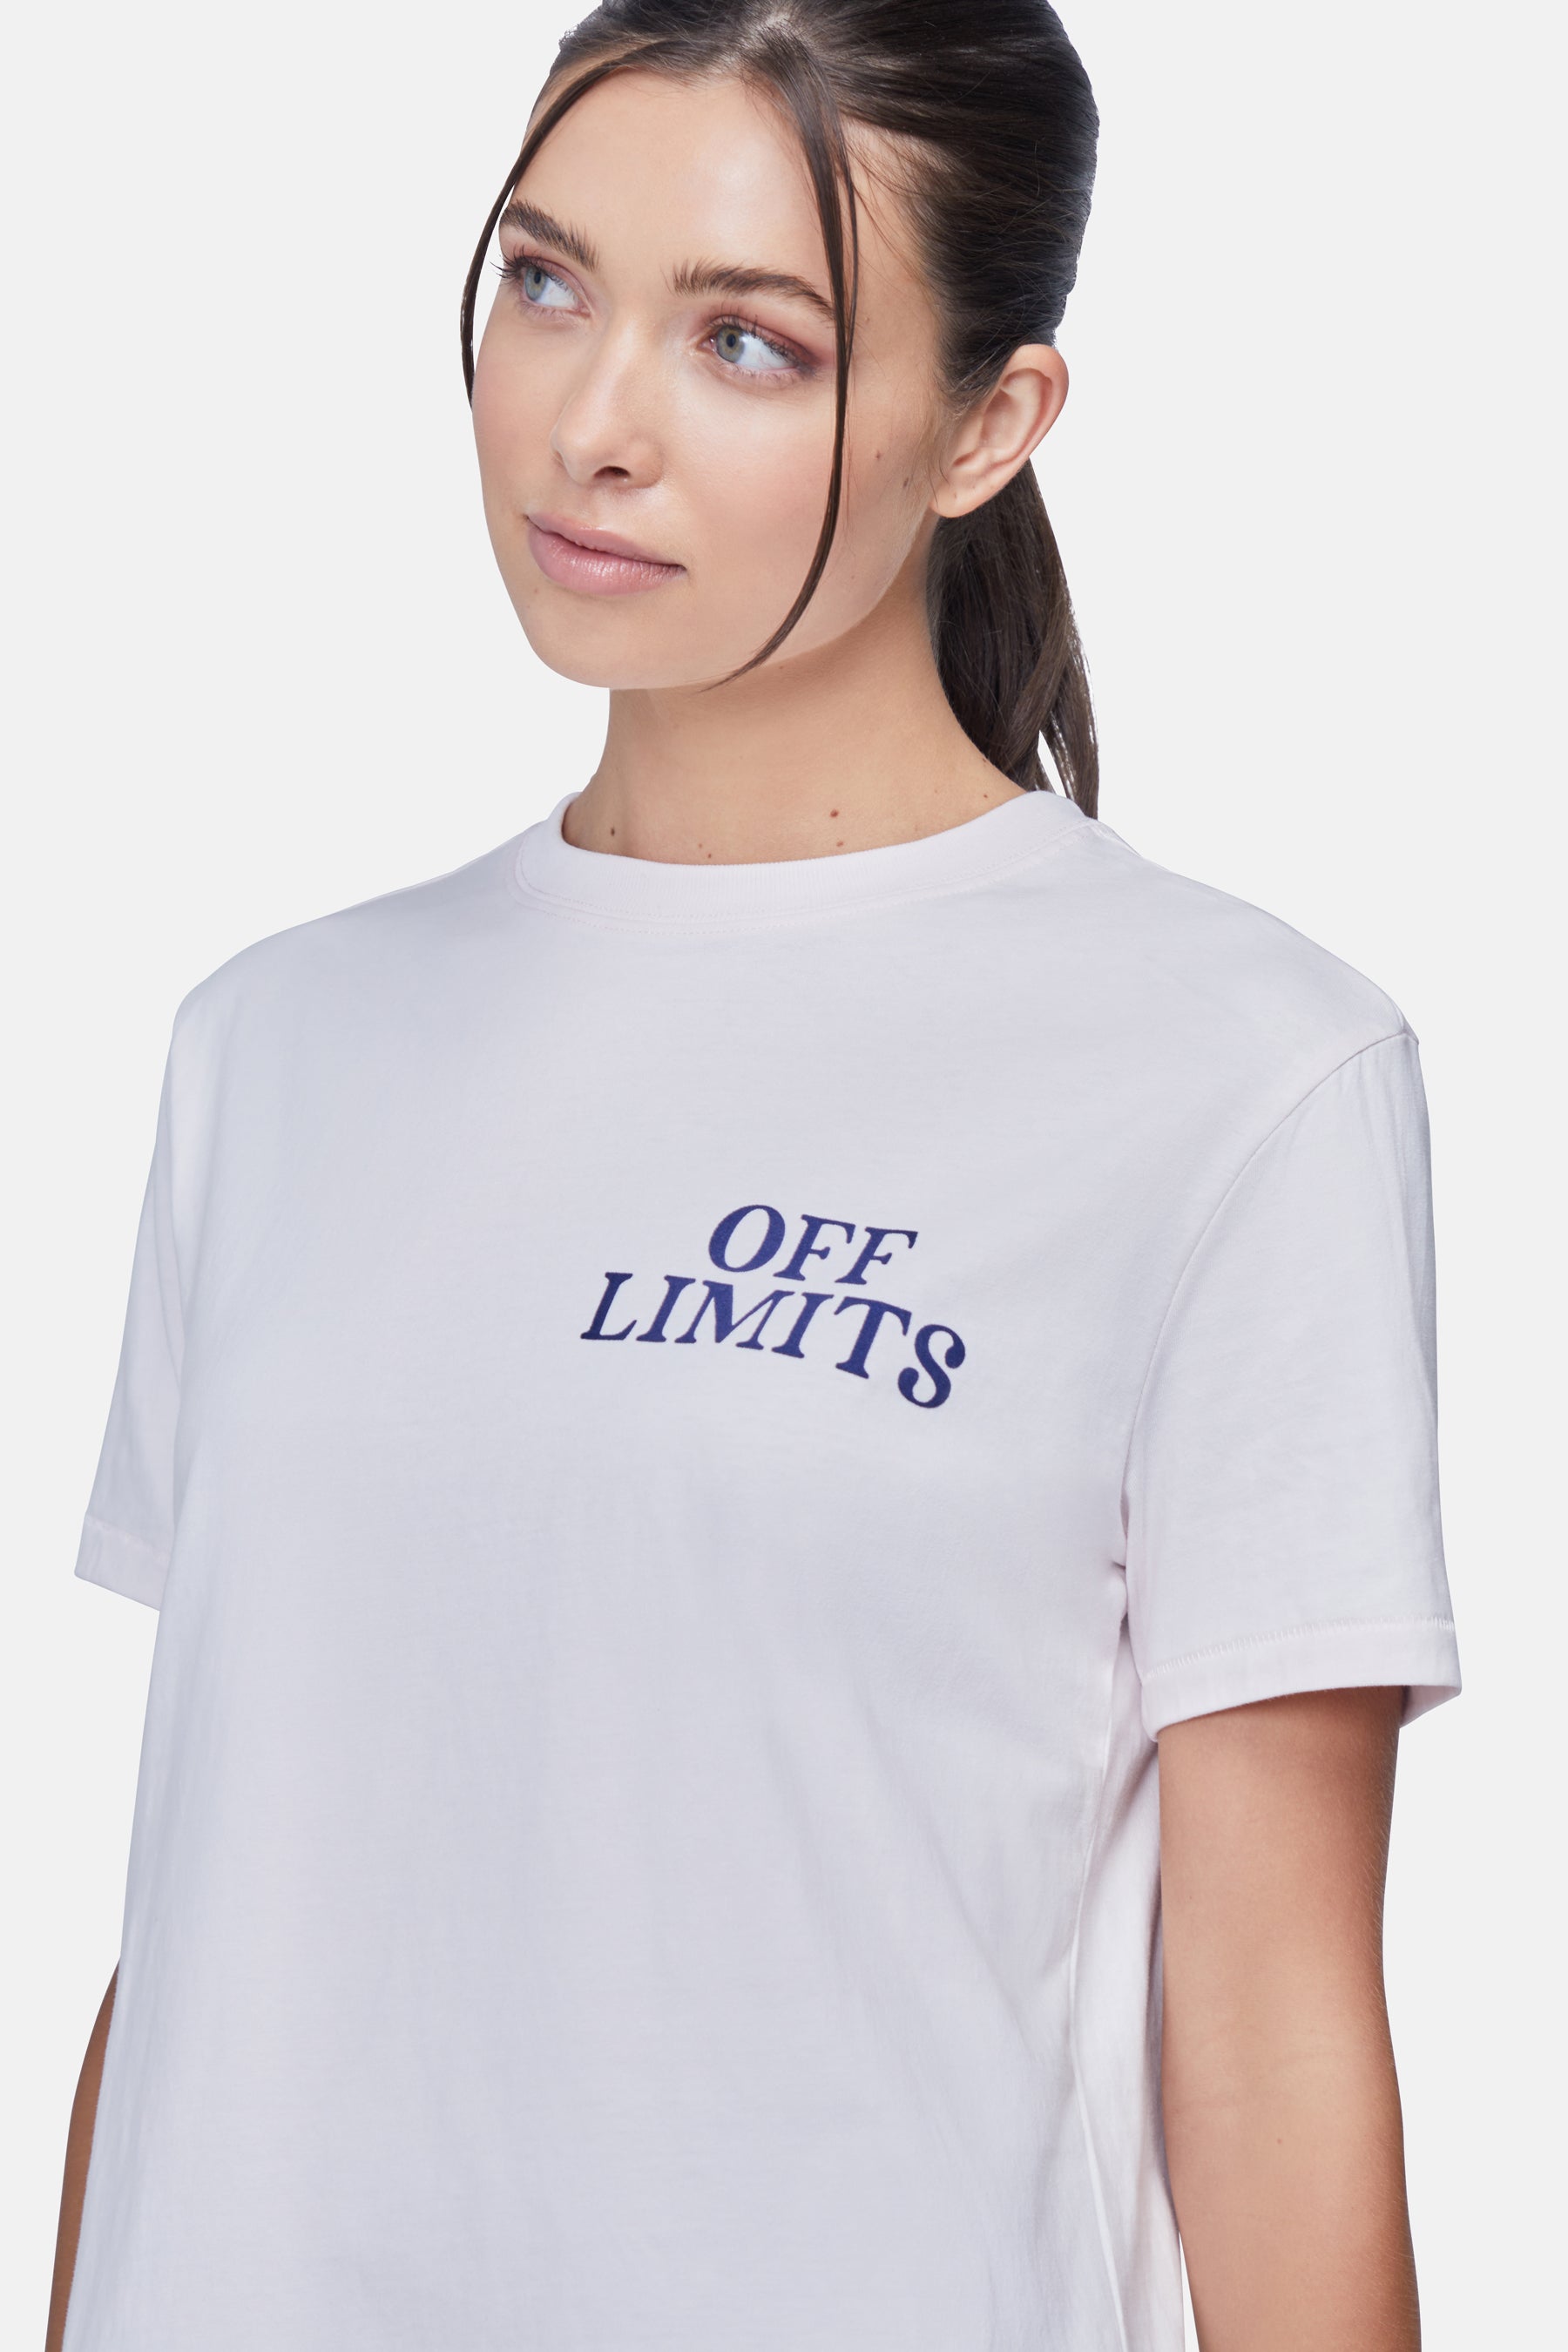 Off Limits Ryan Tee | Shrinking Violet